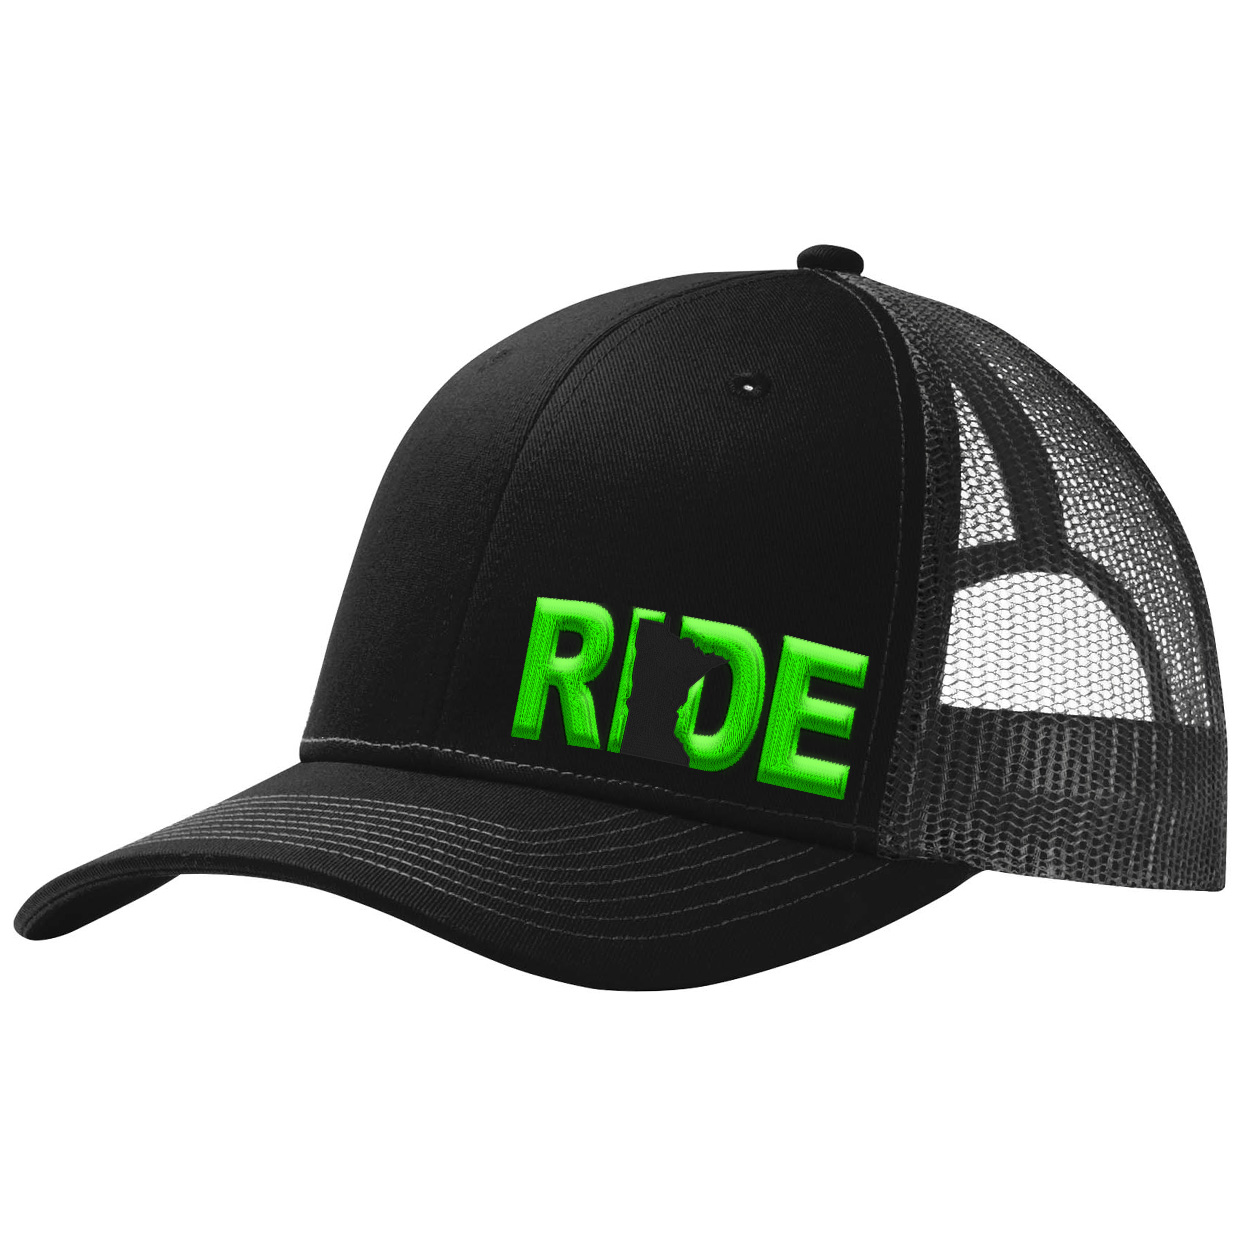 Ride Minnesota Night Out Pro Embroidered Snapback Trucker Hat Black/Green